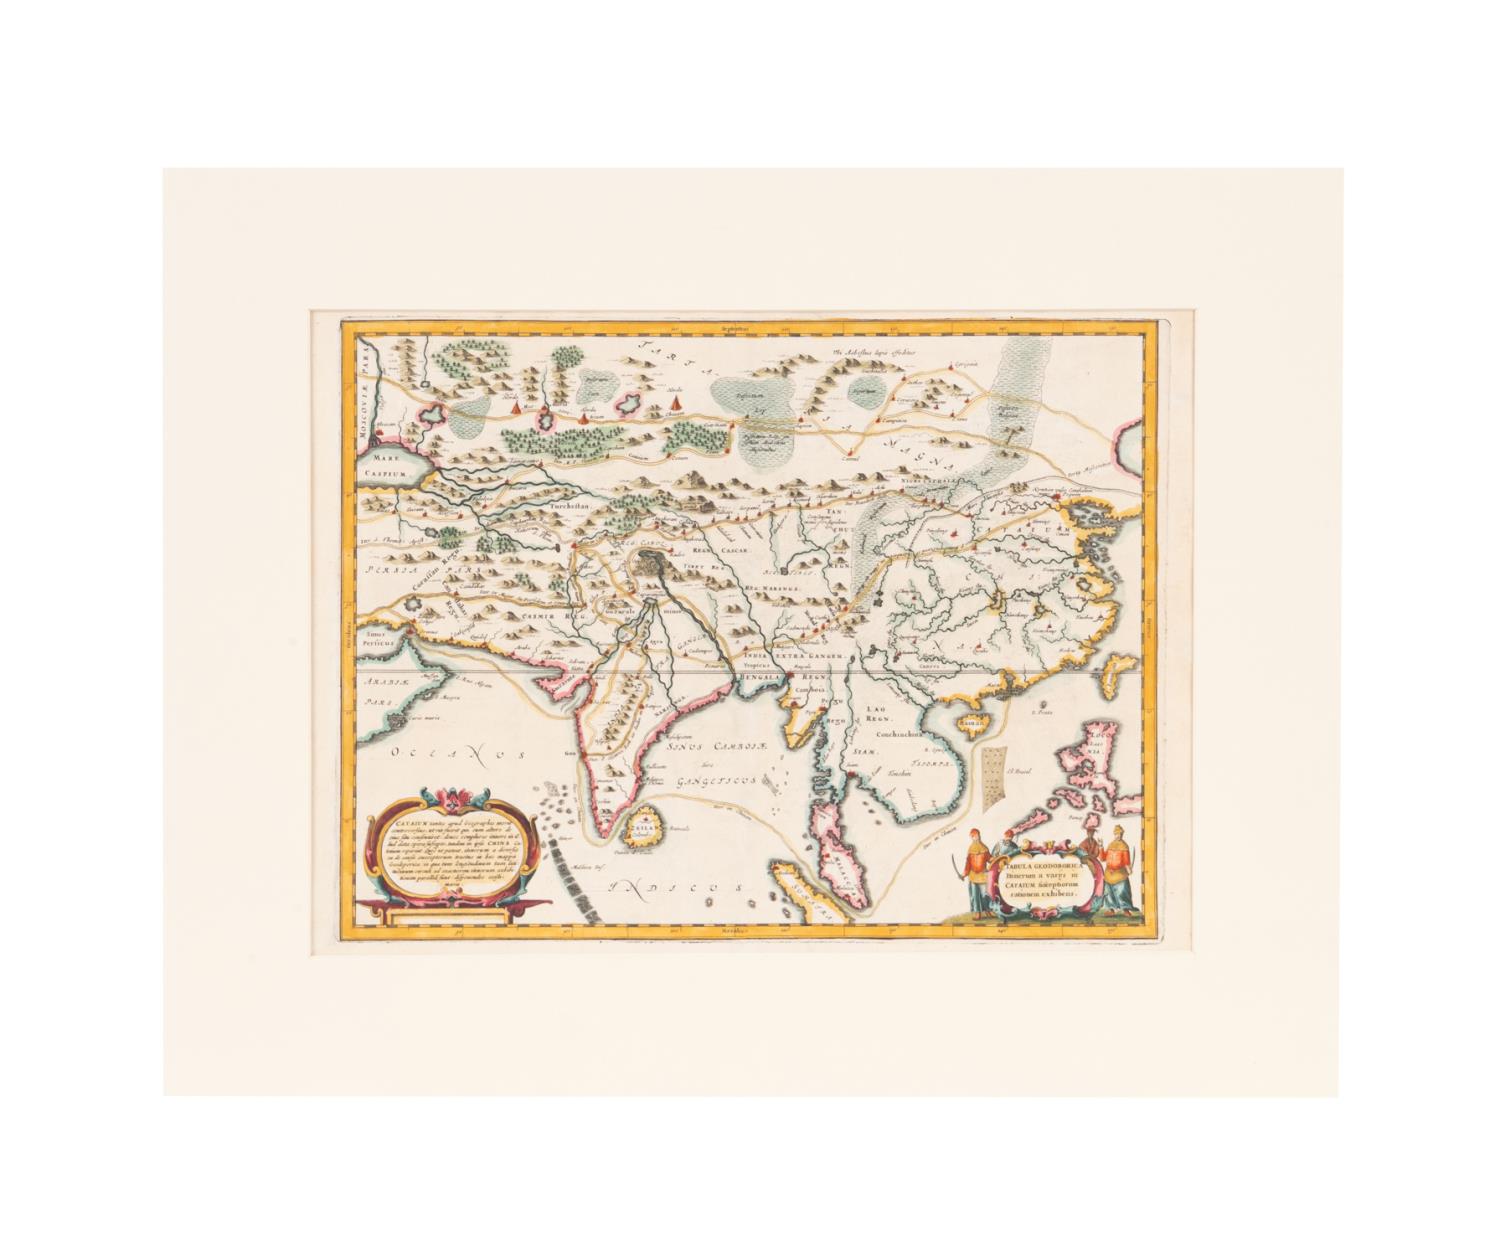 ATHANASIUS KRICHER MAP OF CHINAAND 2f9d1f